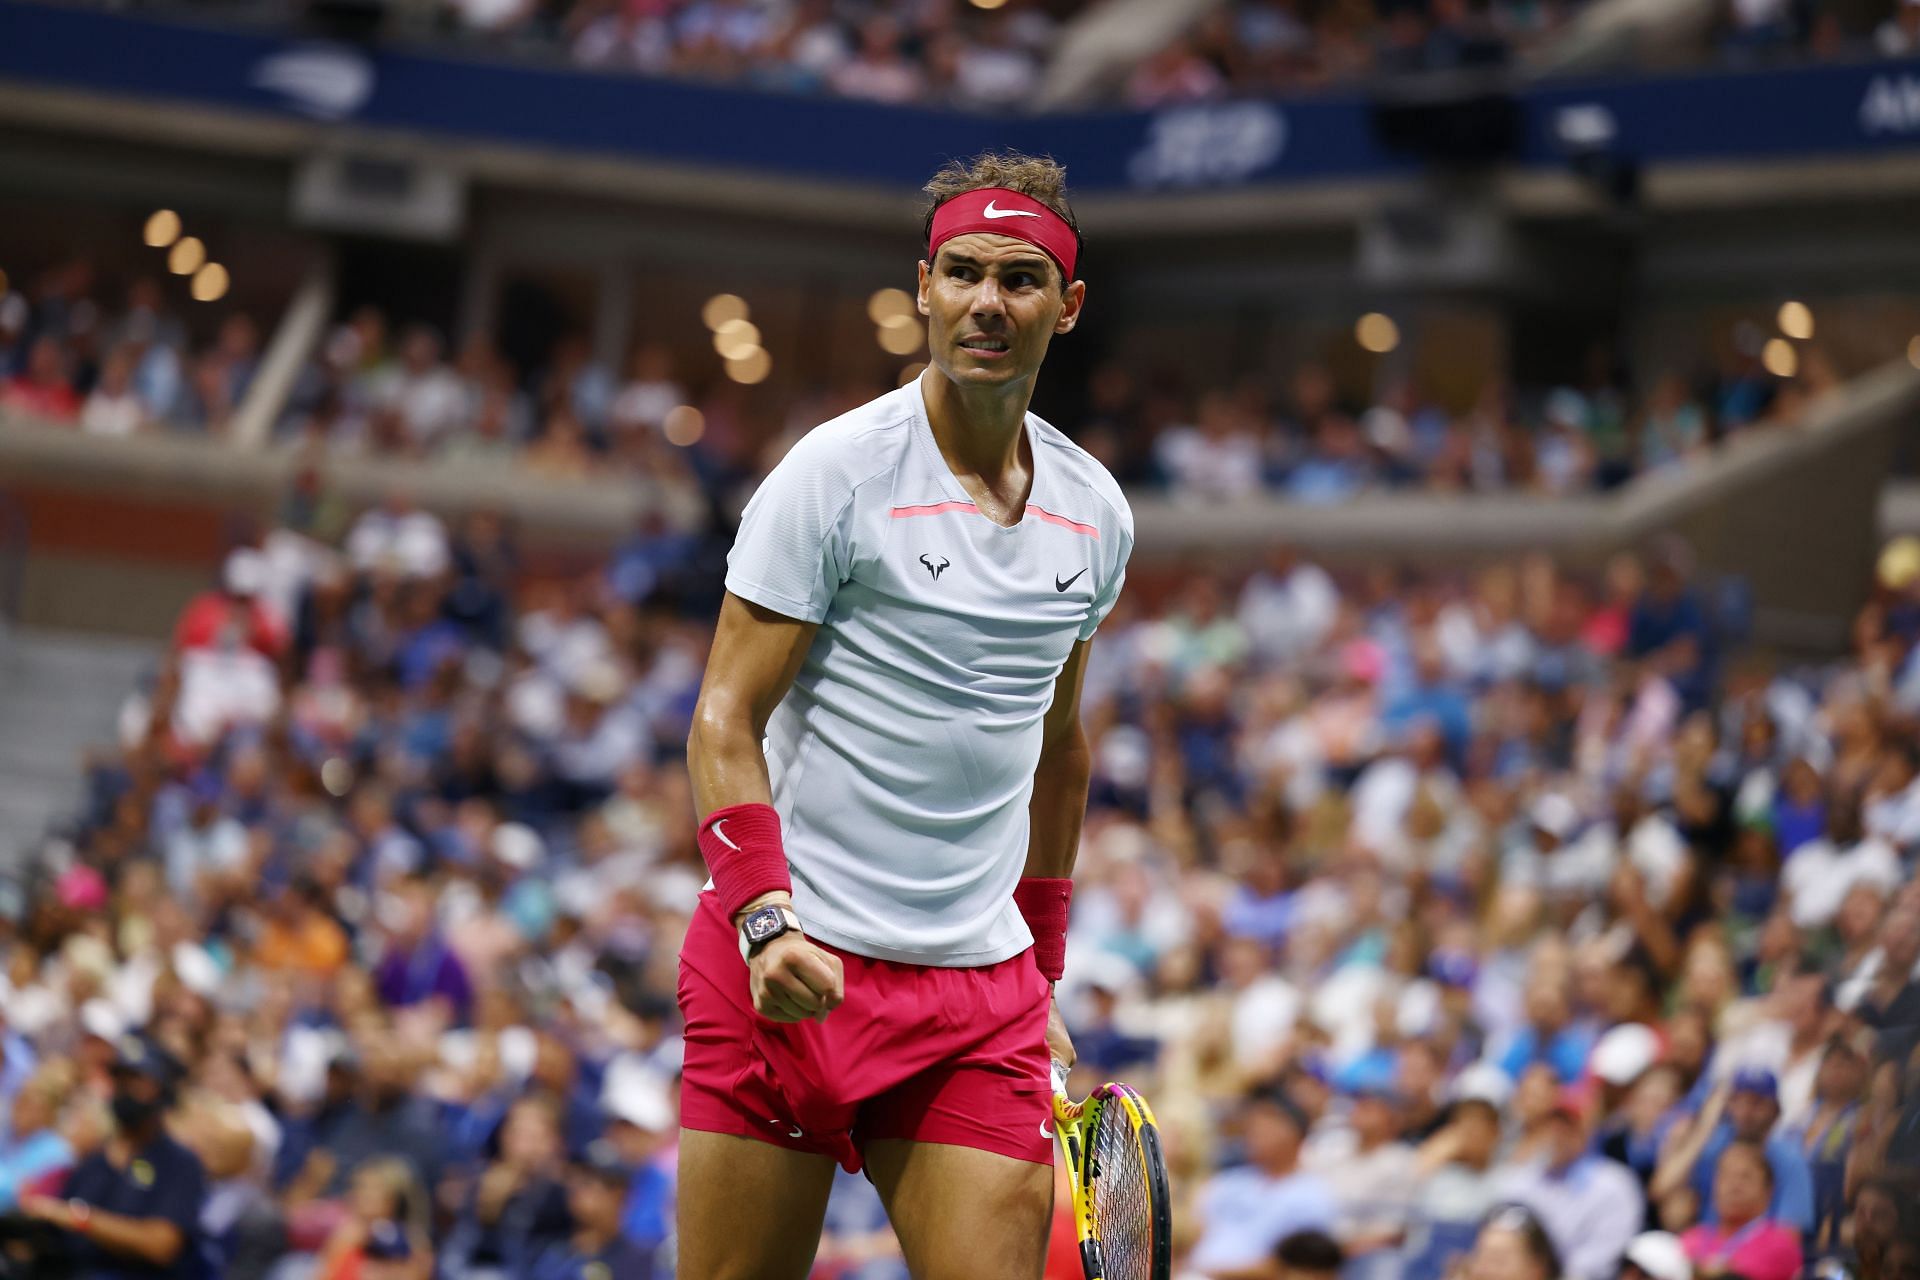 Rafael Nadal in action at the US Open